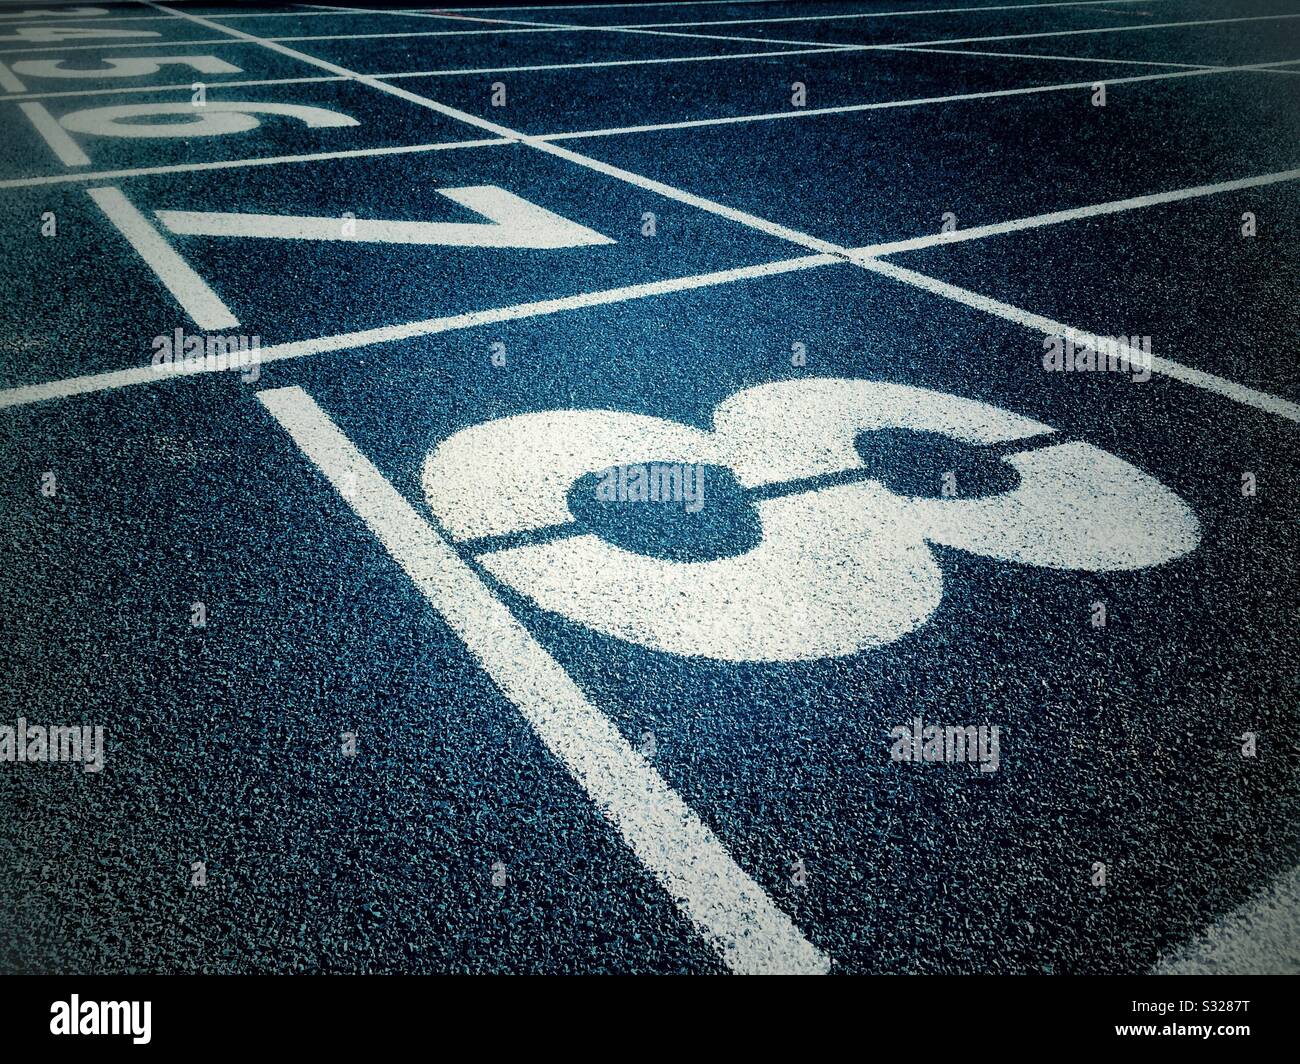 Marking and numbers on a running track Stock Photo